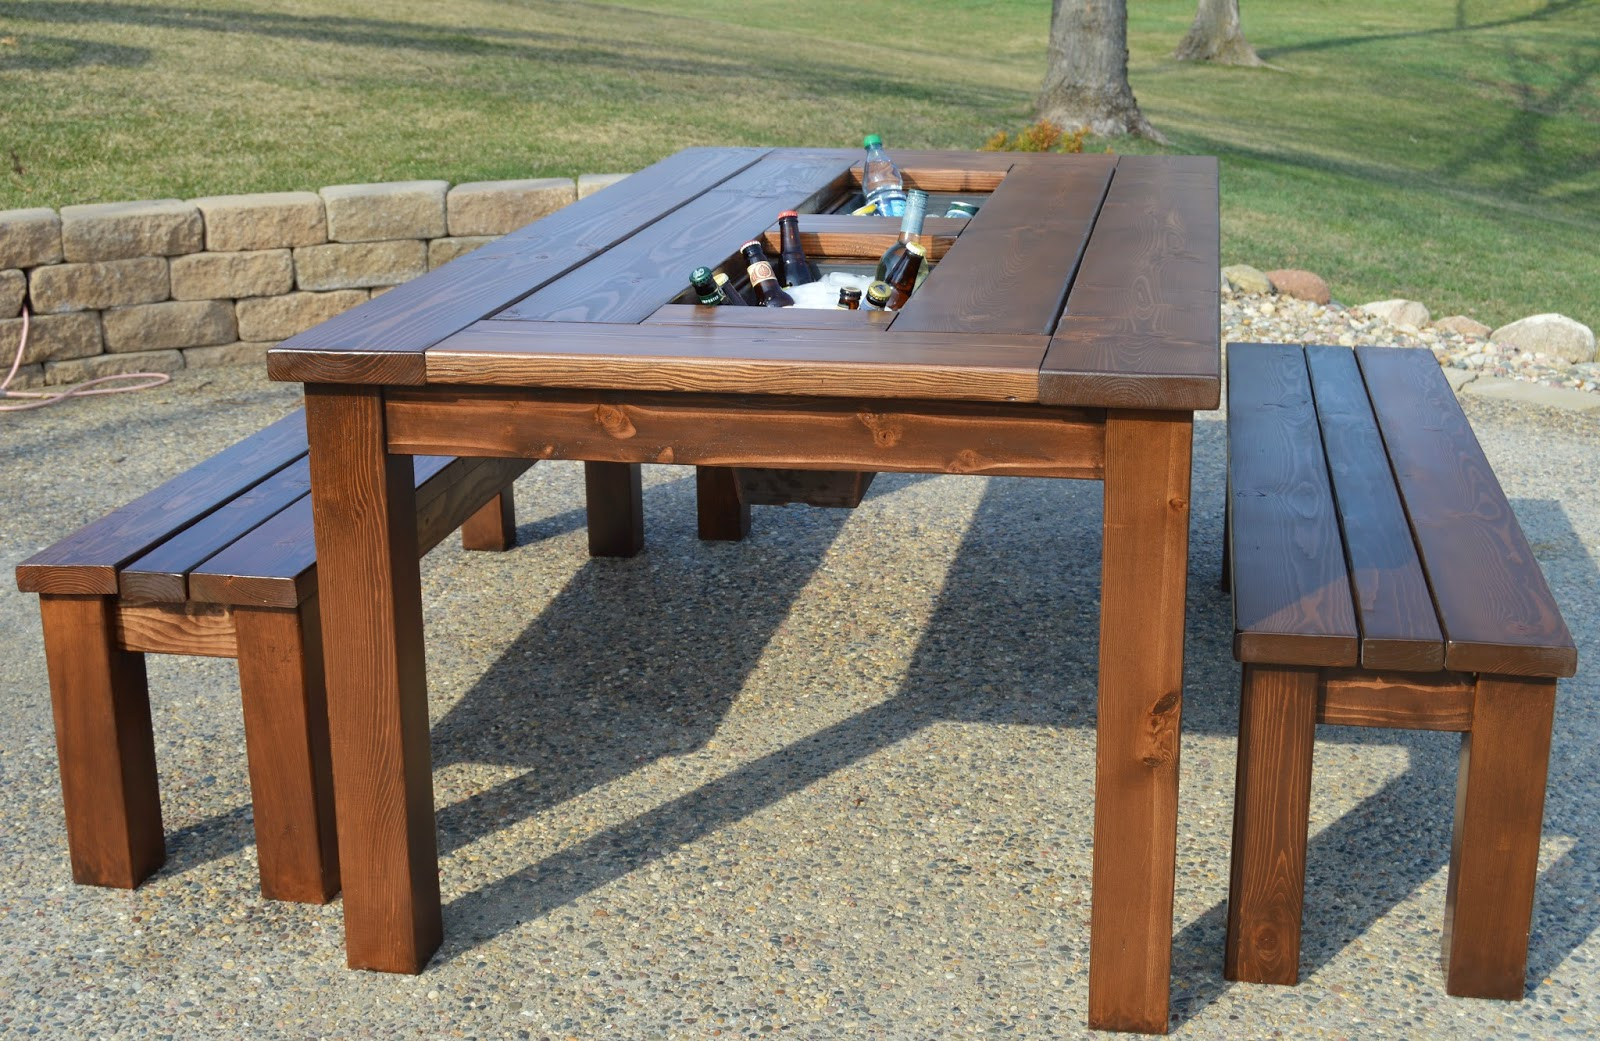 Outdoor Wood Table DIY
 KRUSE S WORKSHOP Patio Party Table with Built In Beer